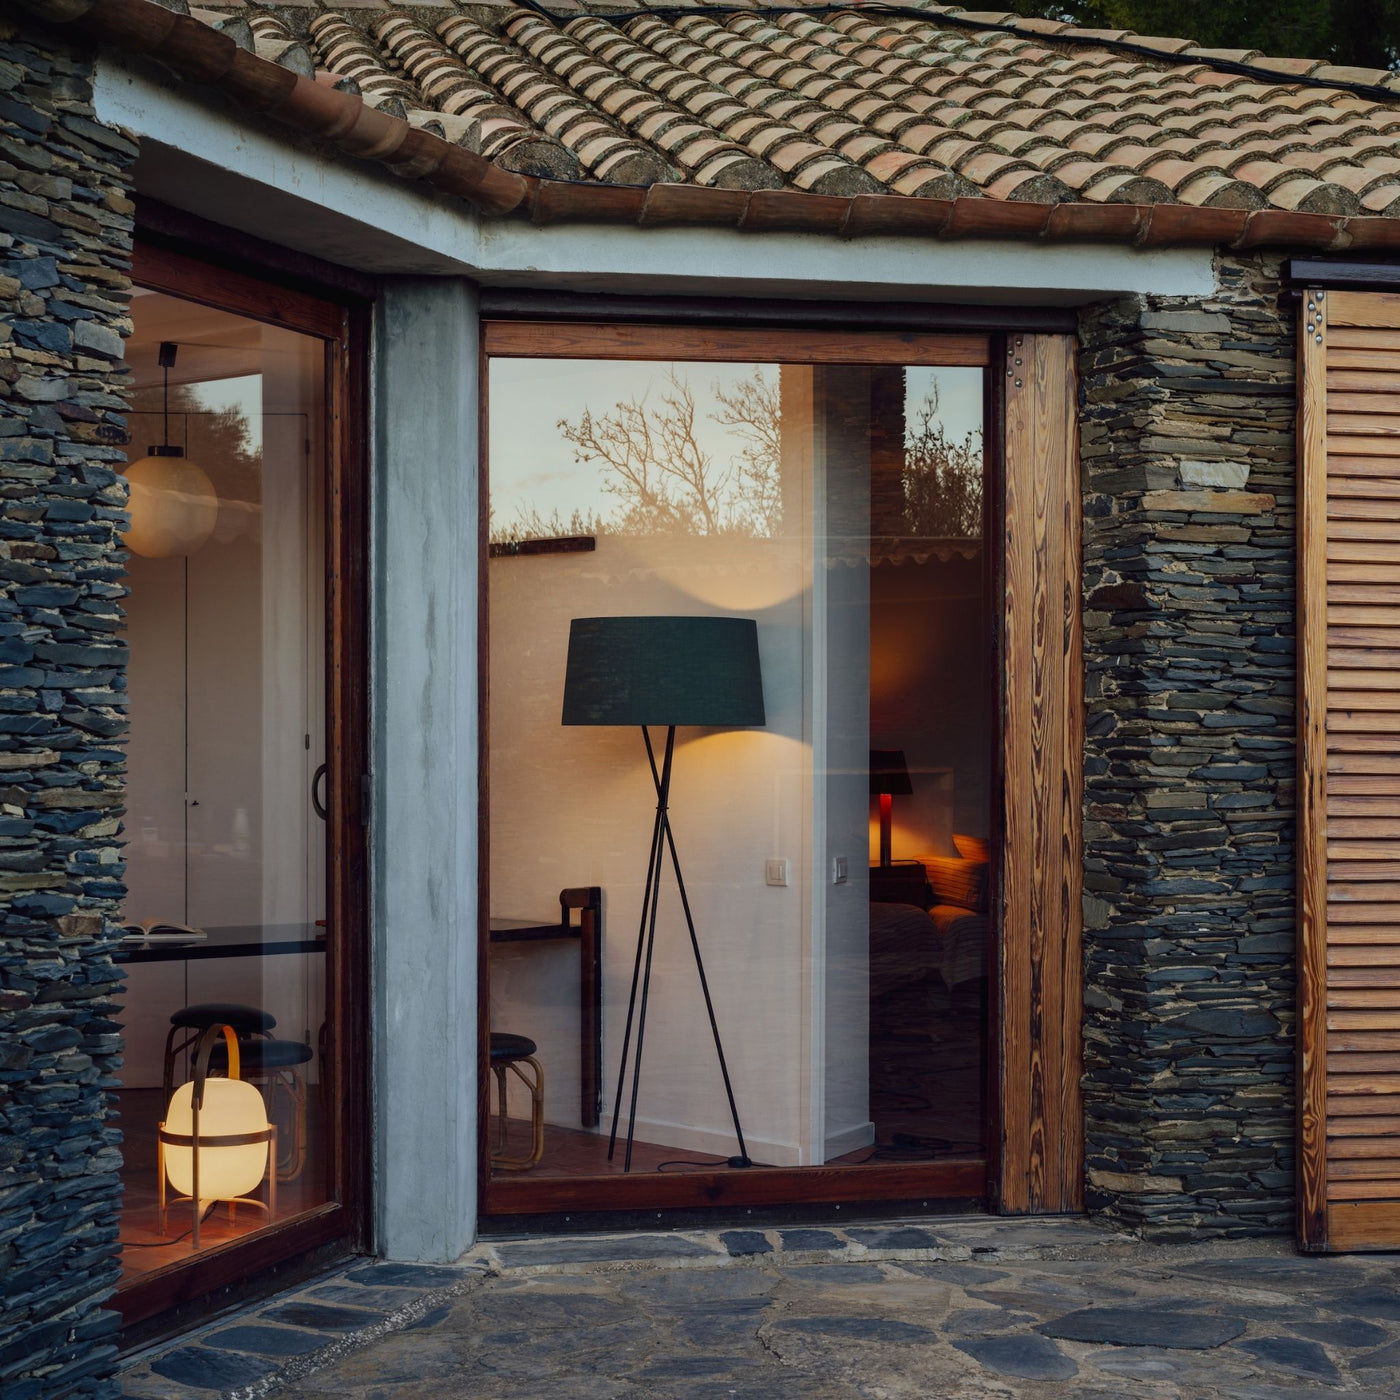 Santa Cole Tripode Floor Lamp and Cesta Table Lamp in Barcelona Stone House Lit Up in Window